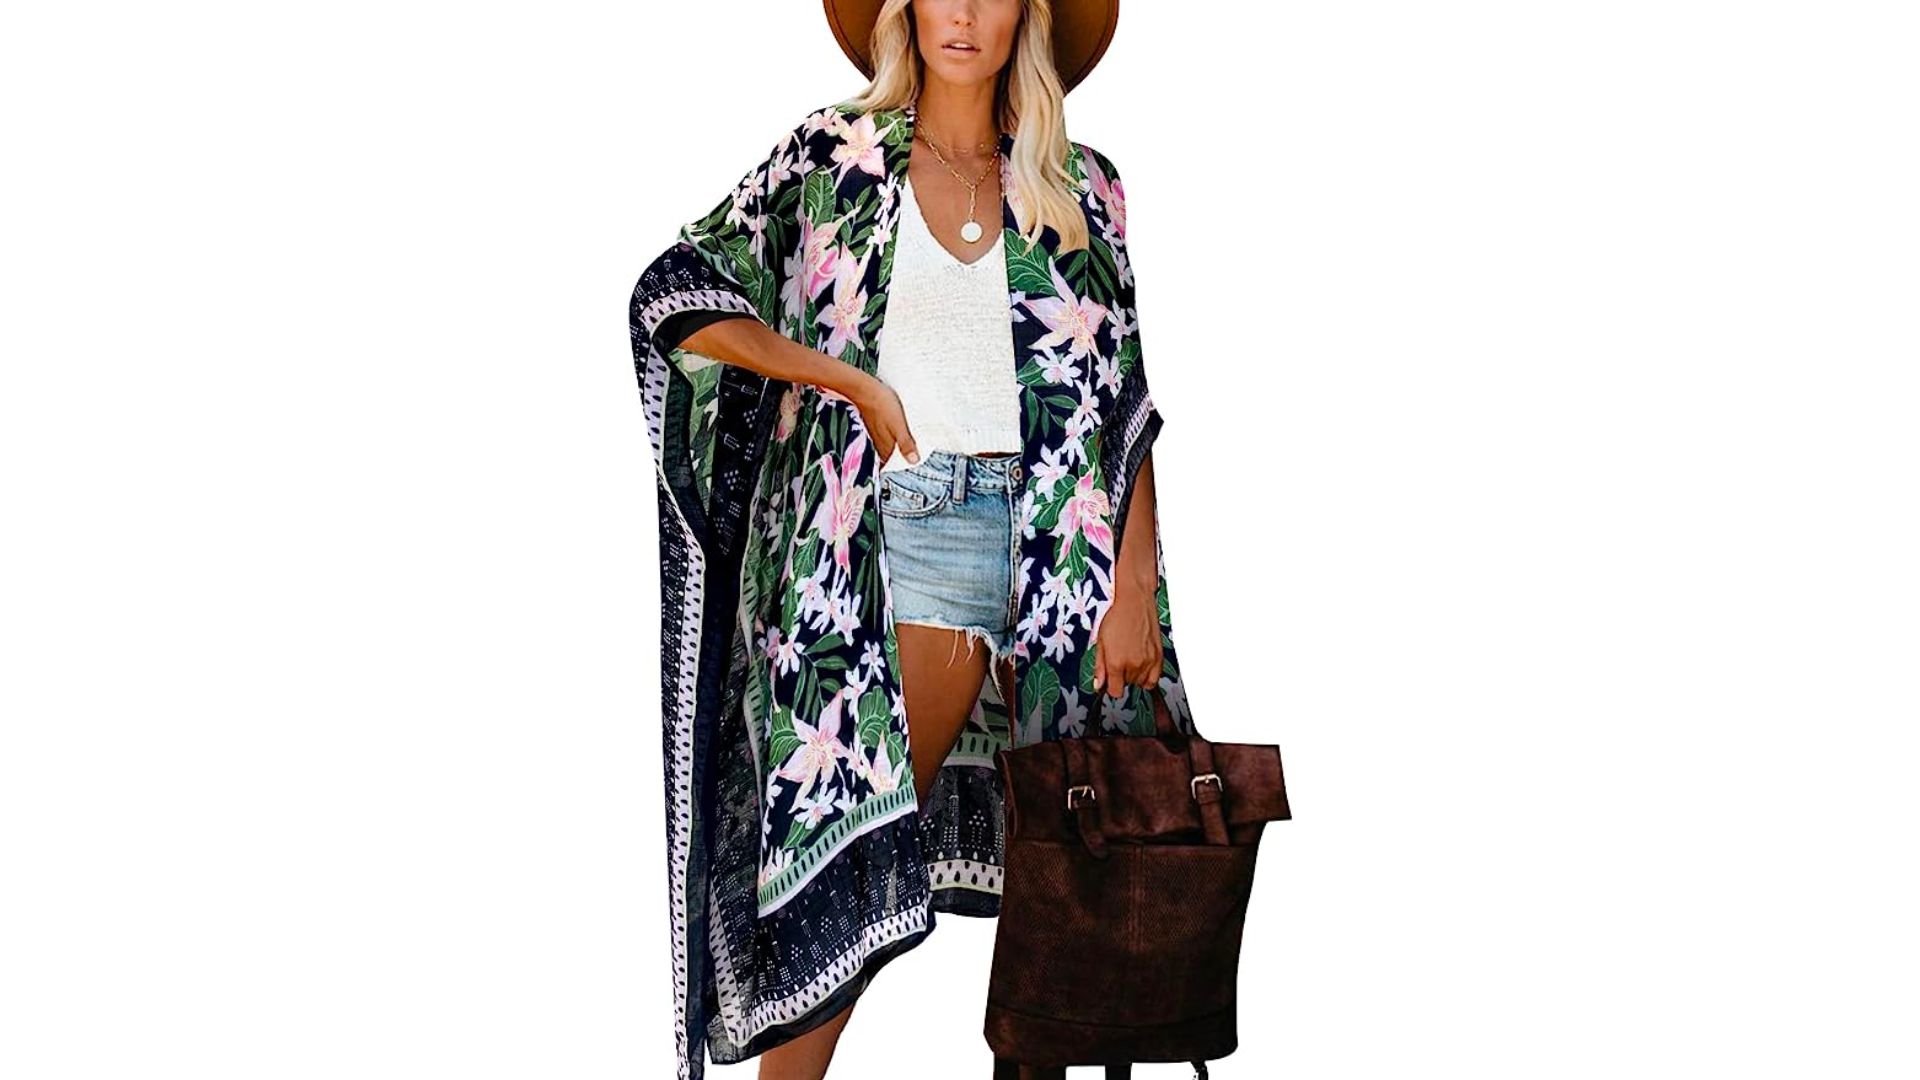 Best Beach Cover-Ups for Women Over 50